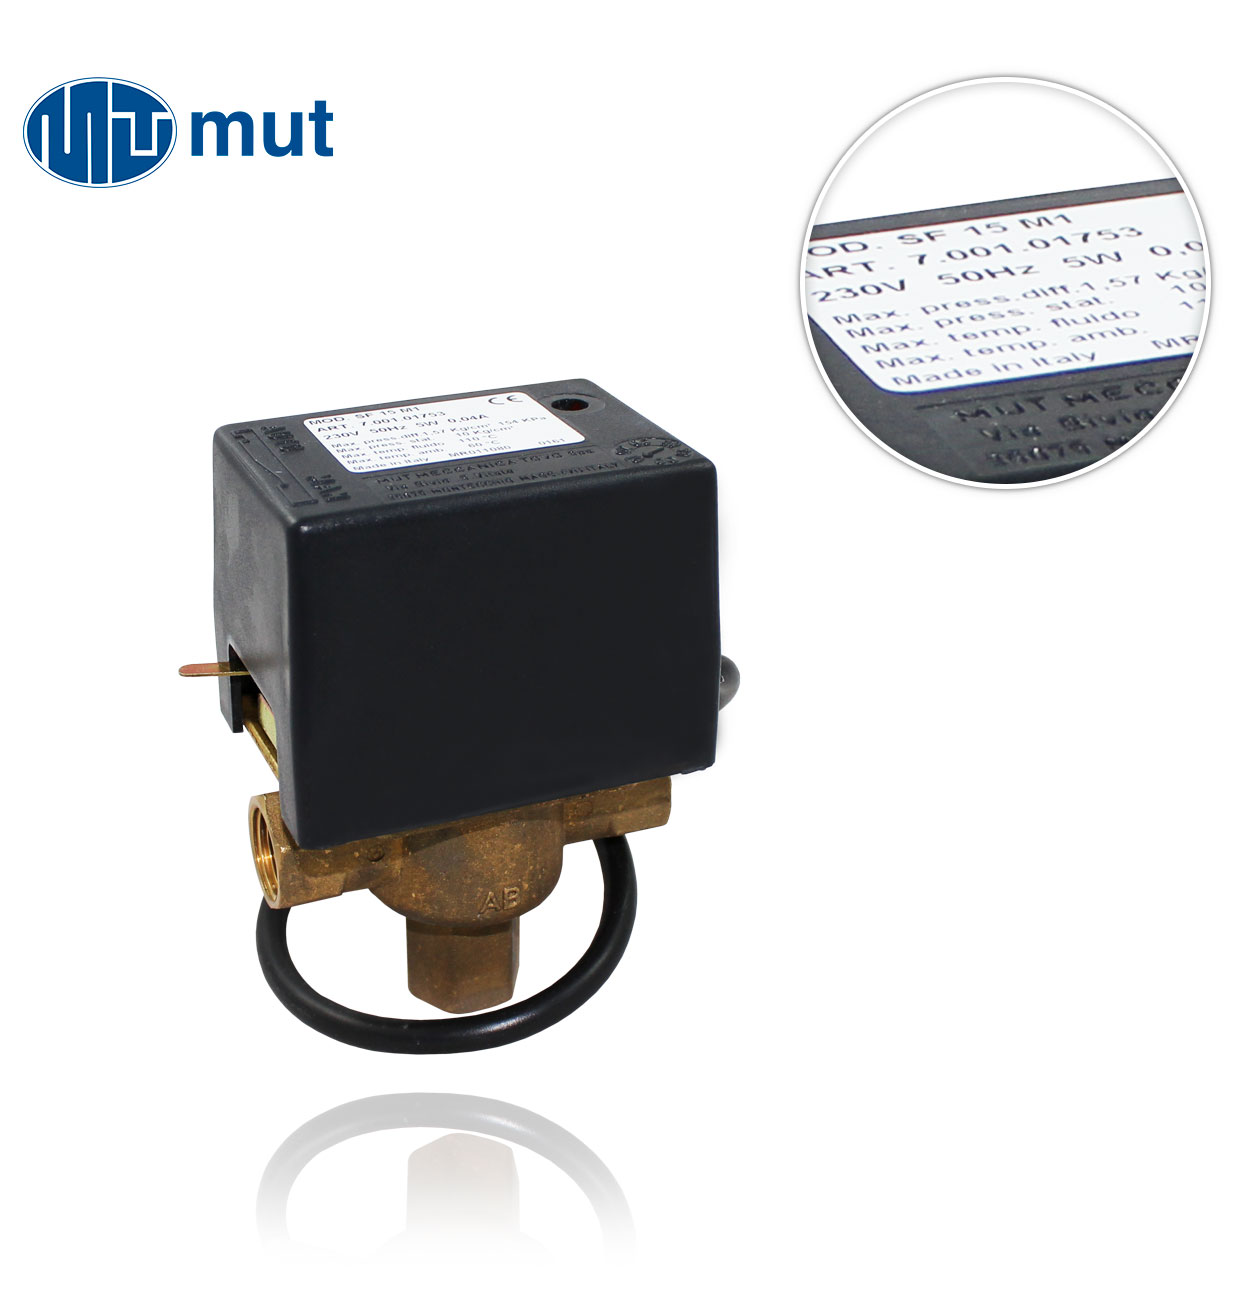 SF 15 M1 FFF R1/2" 3-way MUT ZONE with 230V microswitch